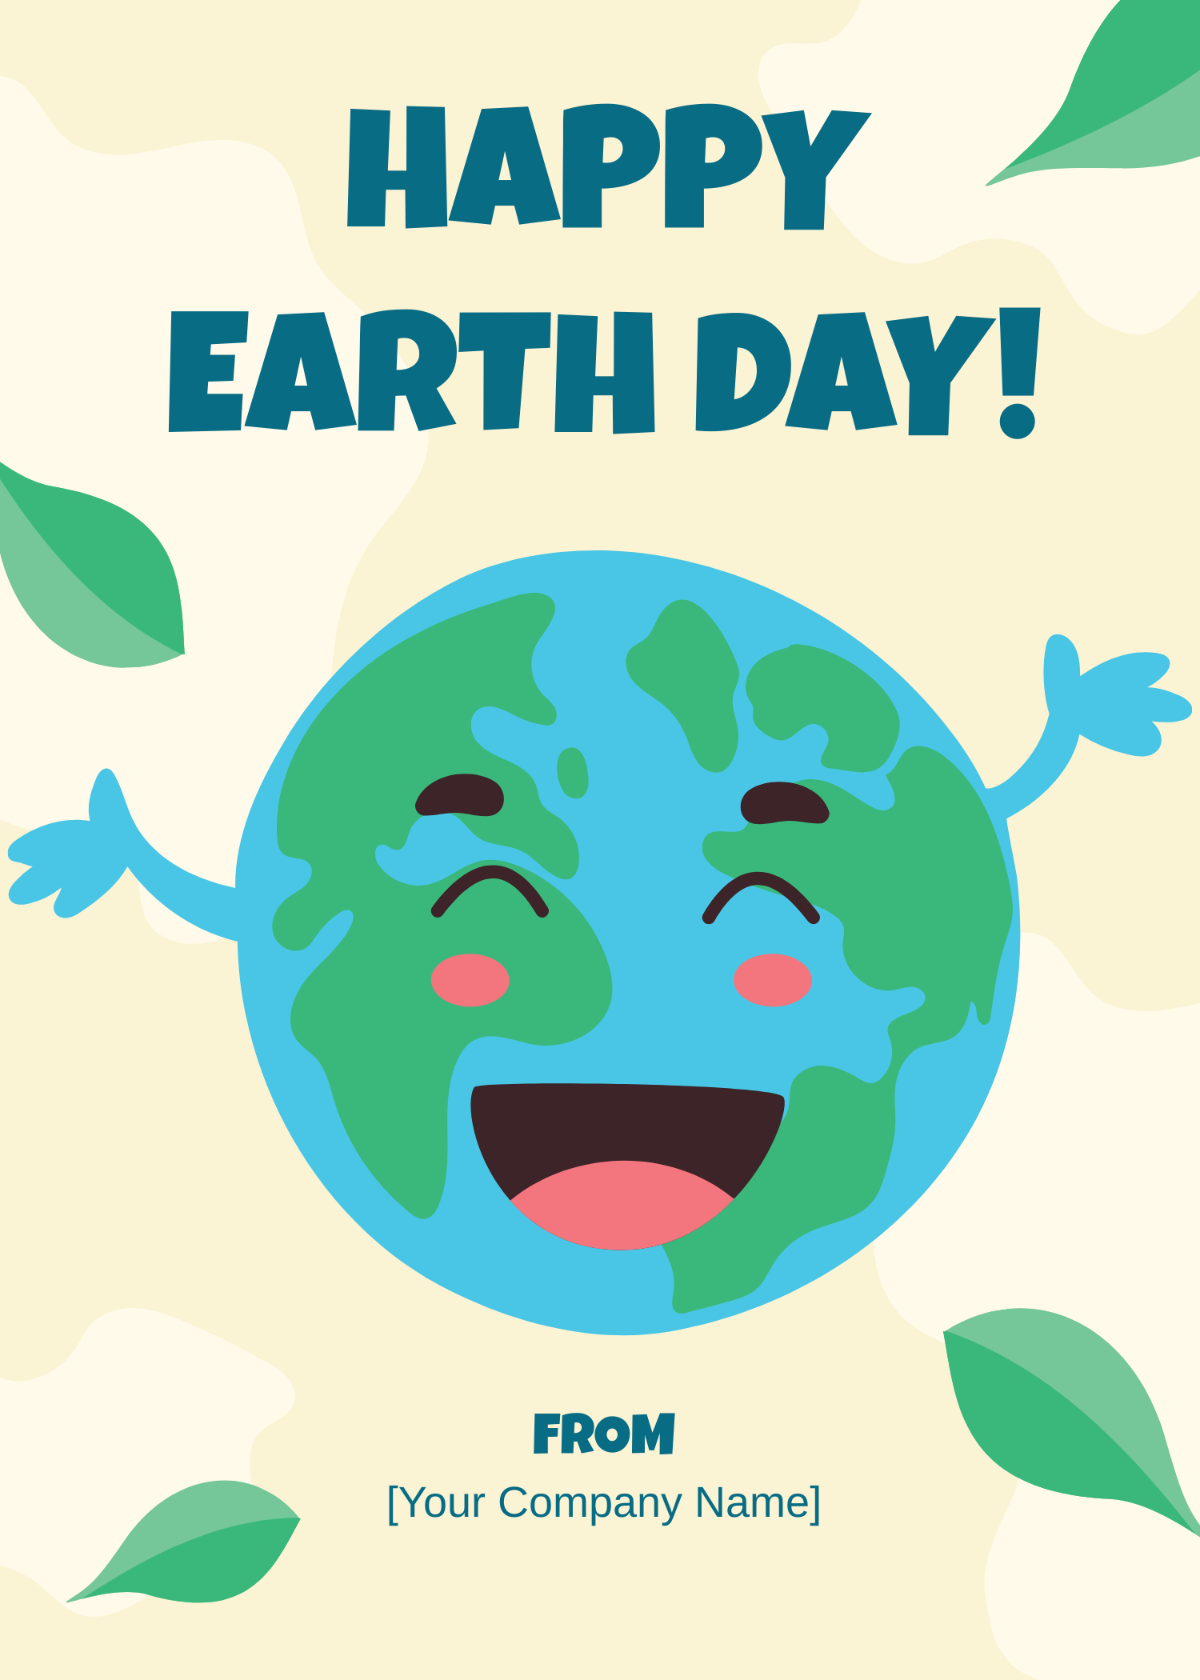 Earth Day Greetings Template